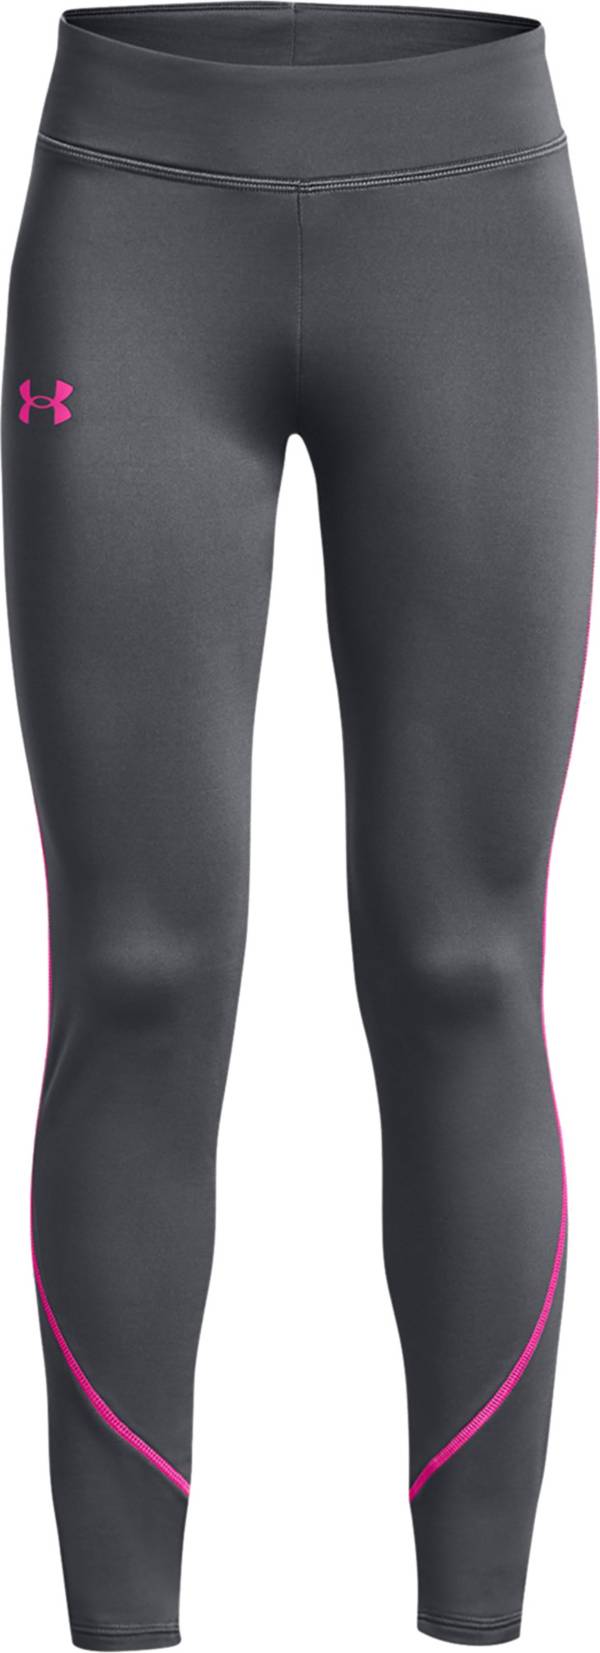 Under Armour Womens ColdGear Compression Tight